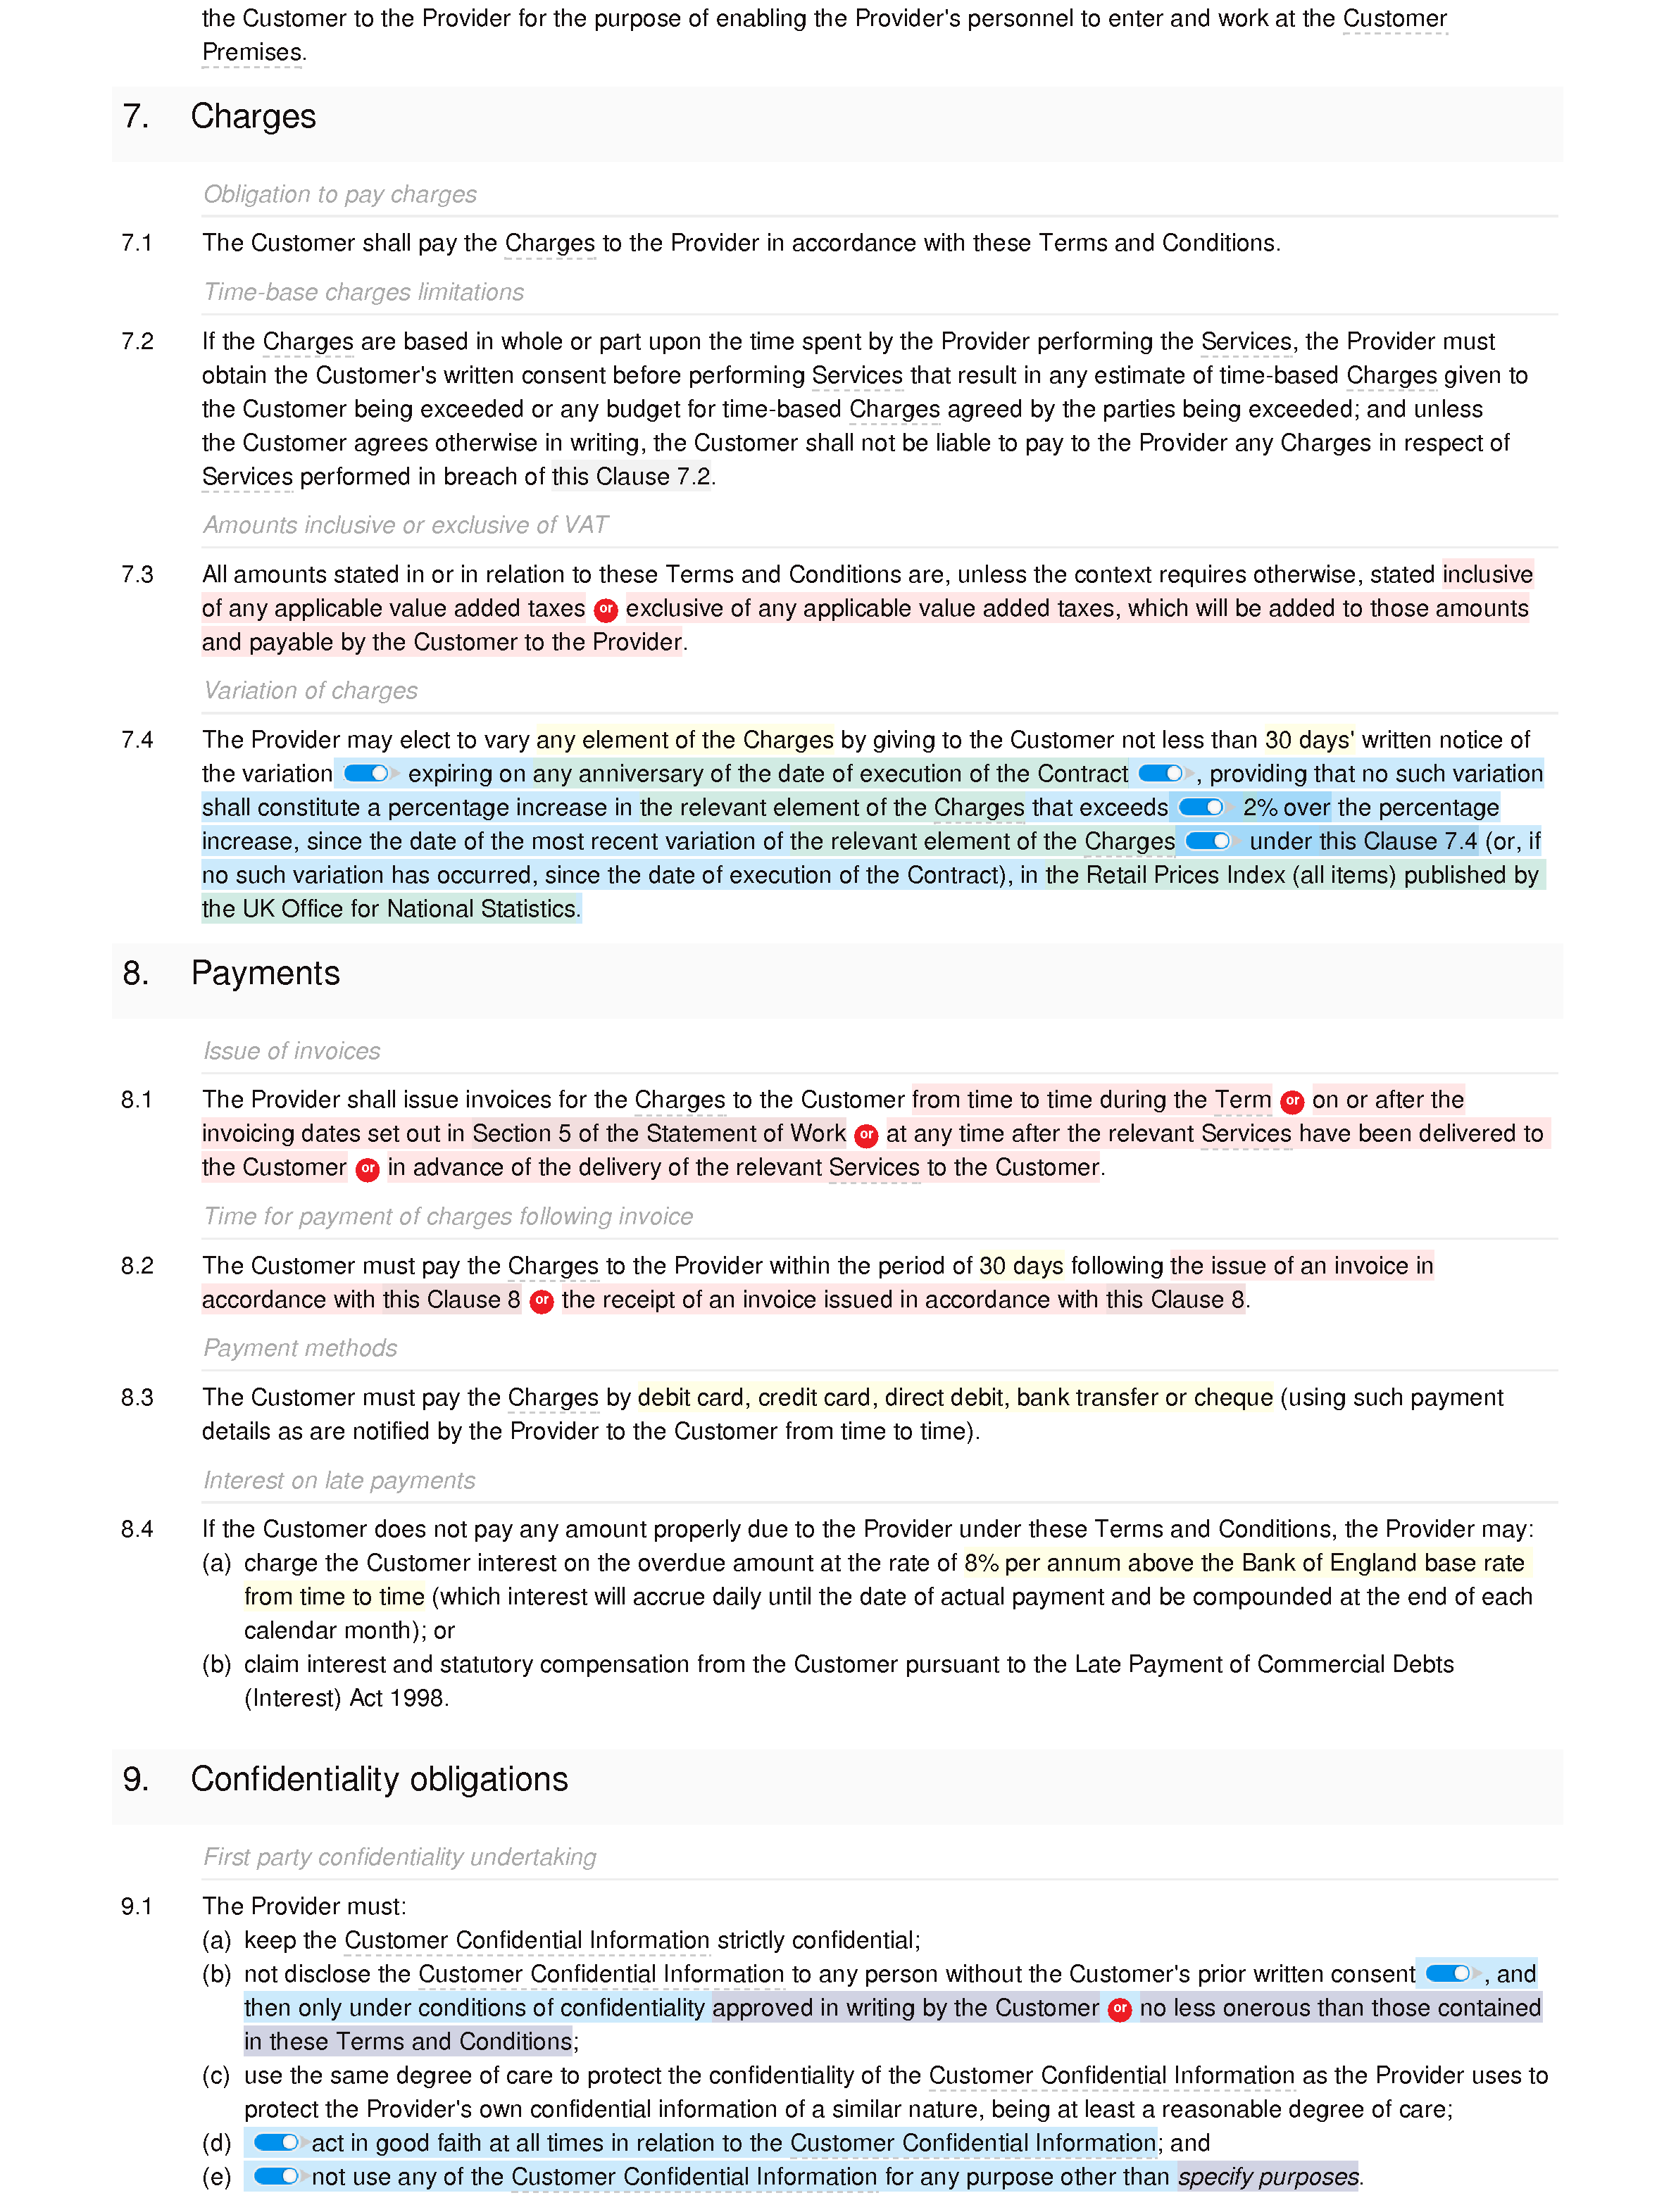 Business training terms and conditions document editor preview